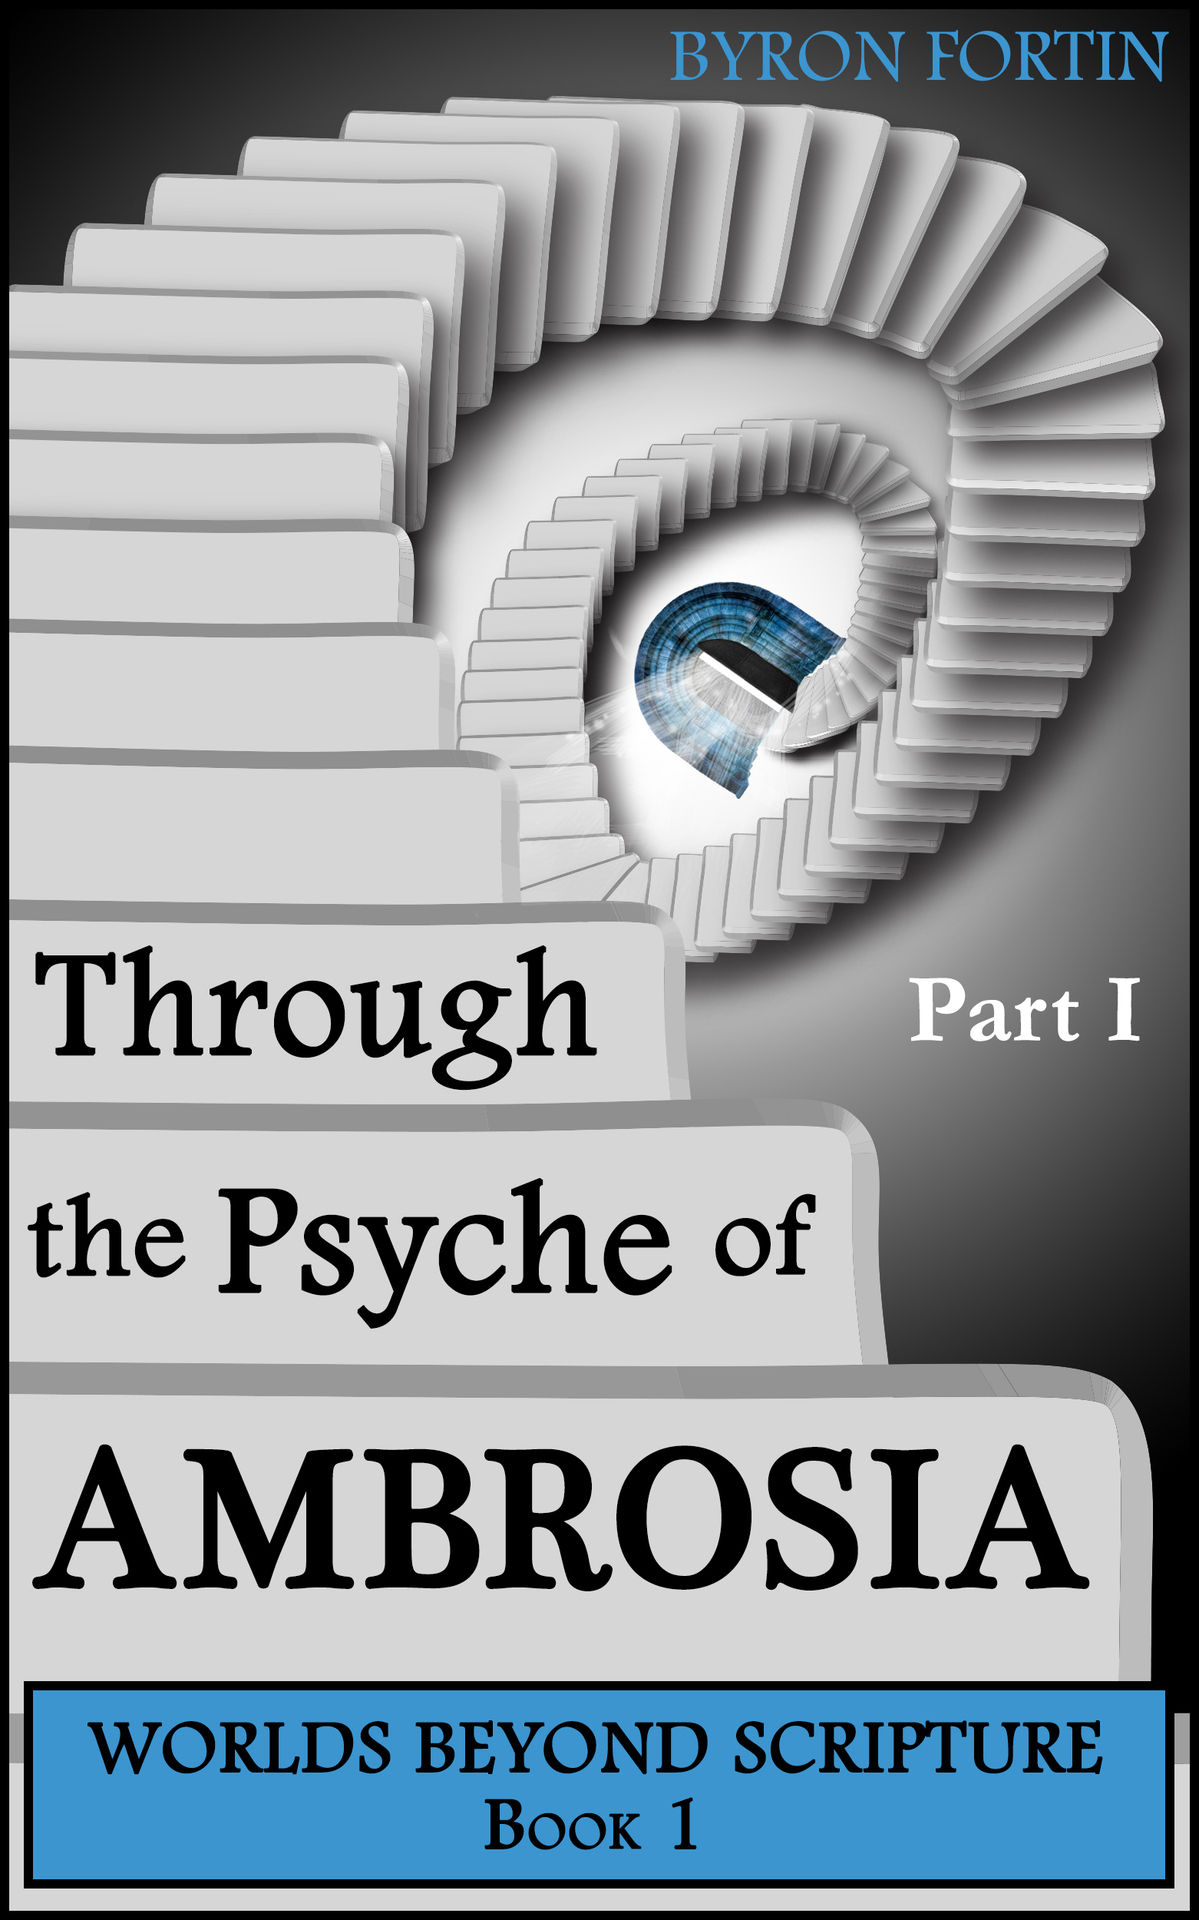 FREE: Through the Psyche of Ambrosia: Part I by Byron Fortin